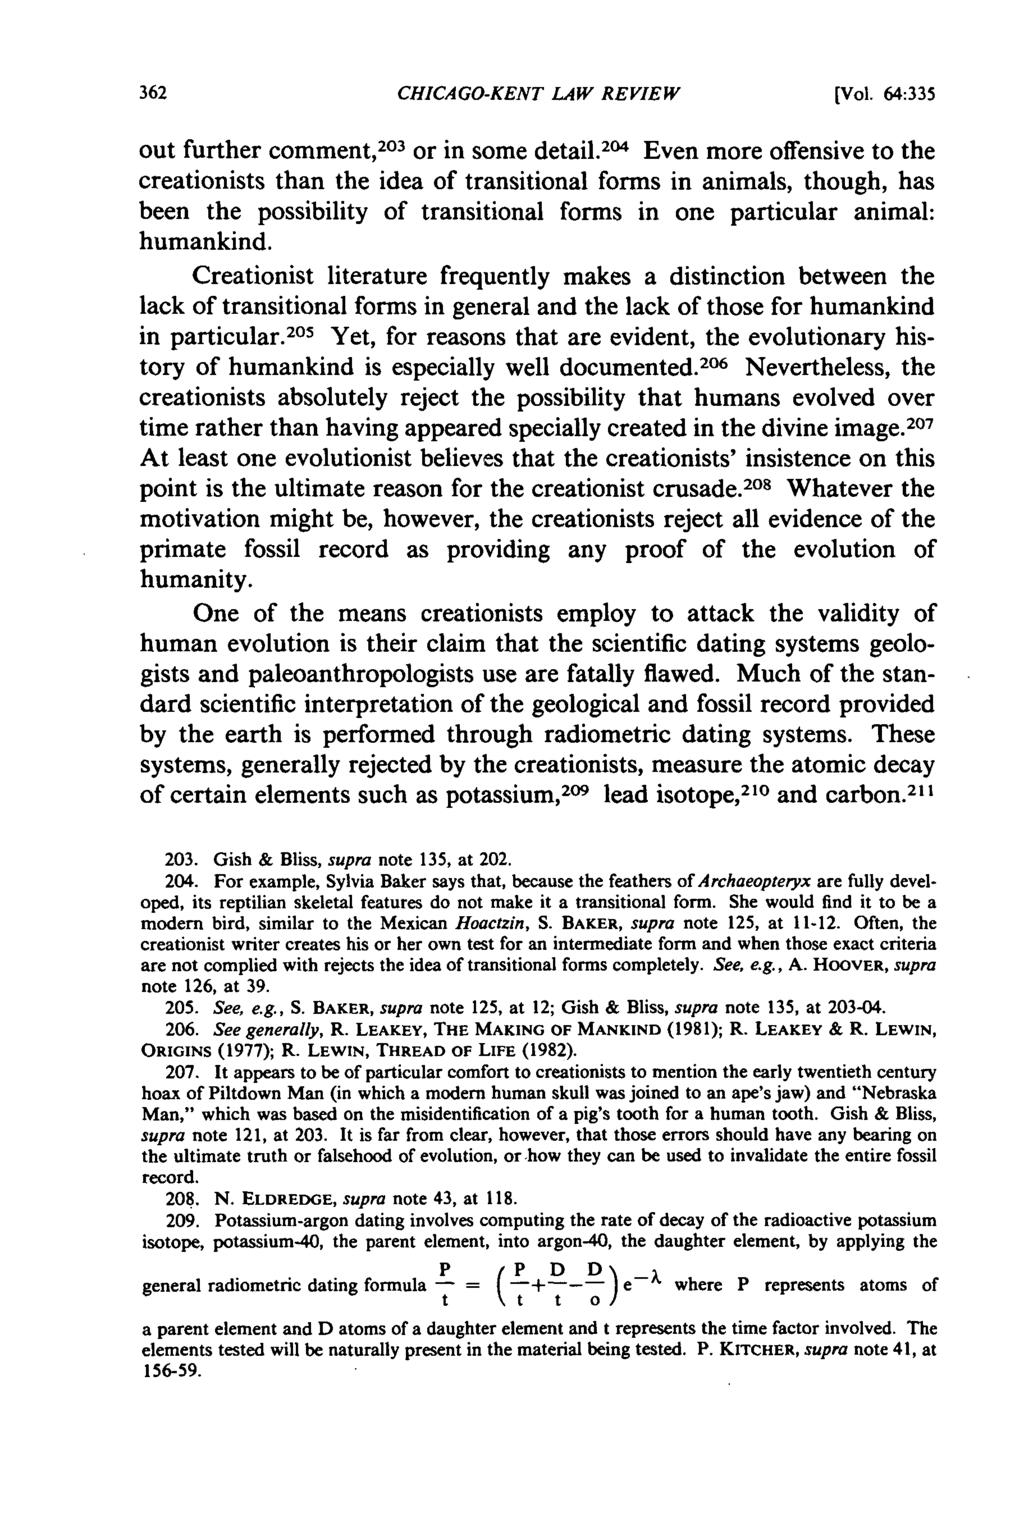 CHICAGO-KENT LAW REVIEW [Vol. 64:335 out further comment, 203 or in some detail.